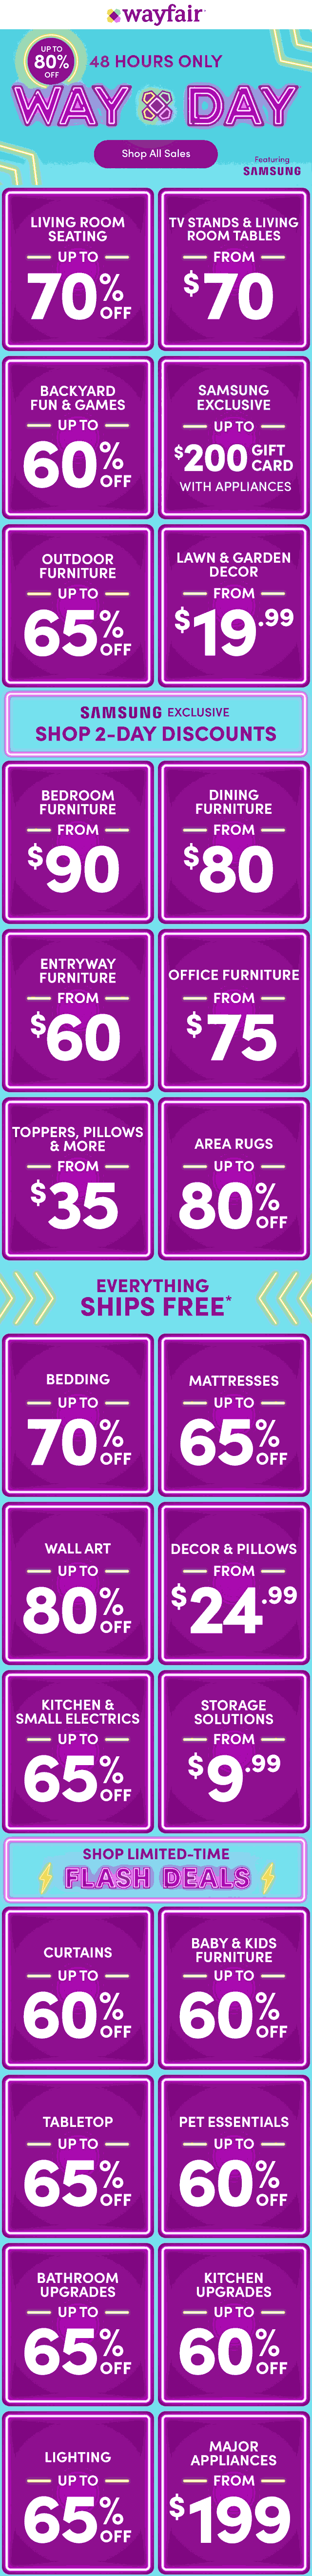 Wayfair stores Coupon  The Black friday of homegoods Way Day yearly sale at Wayfair, everything ships free #wayfair 